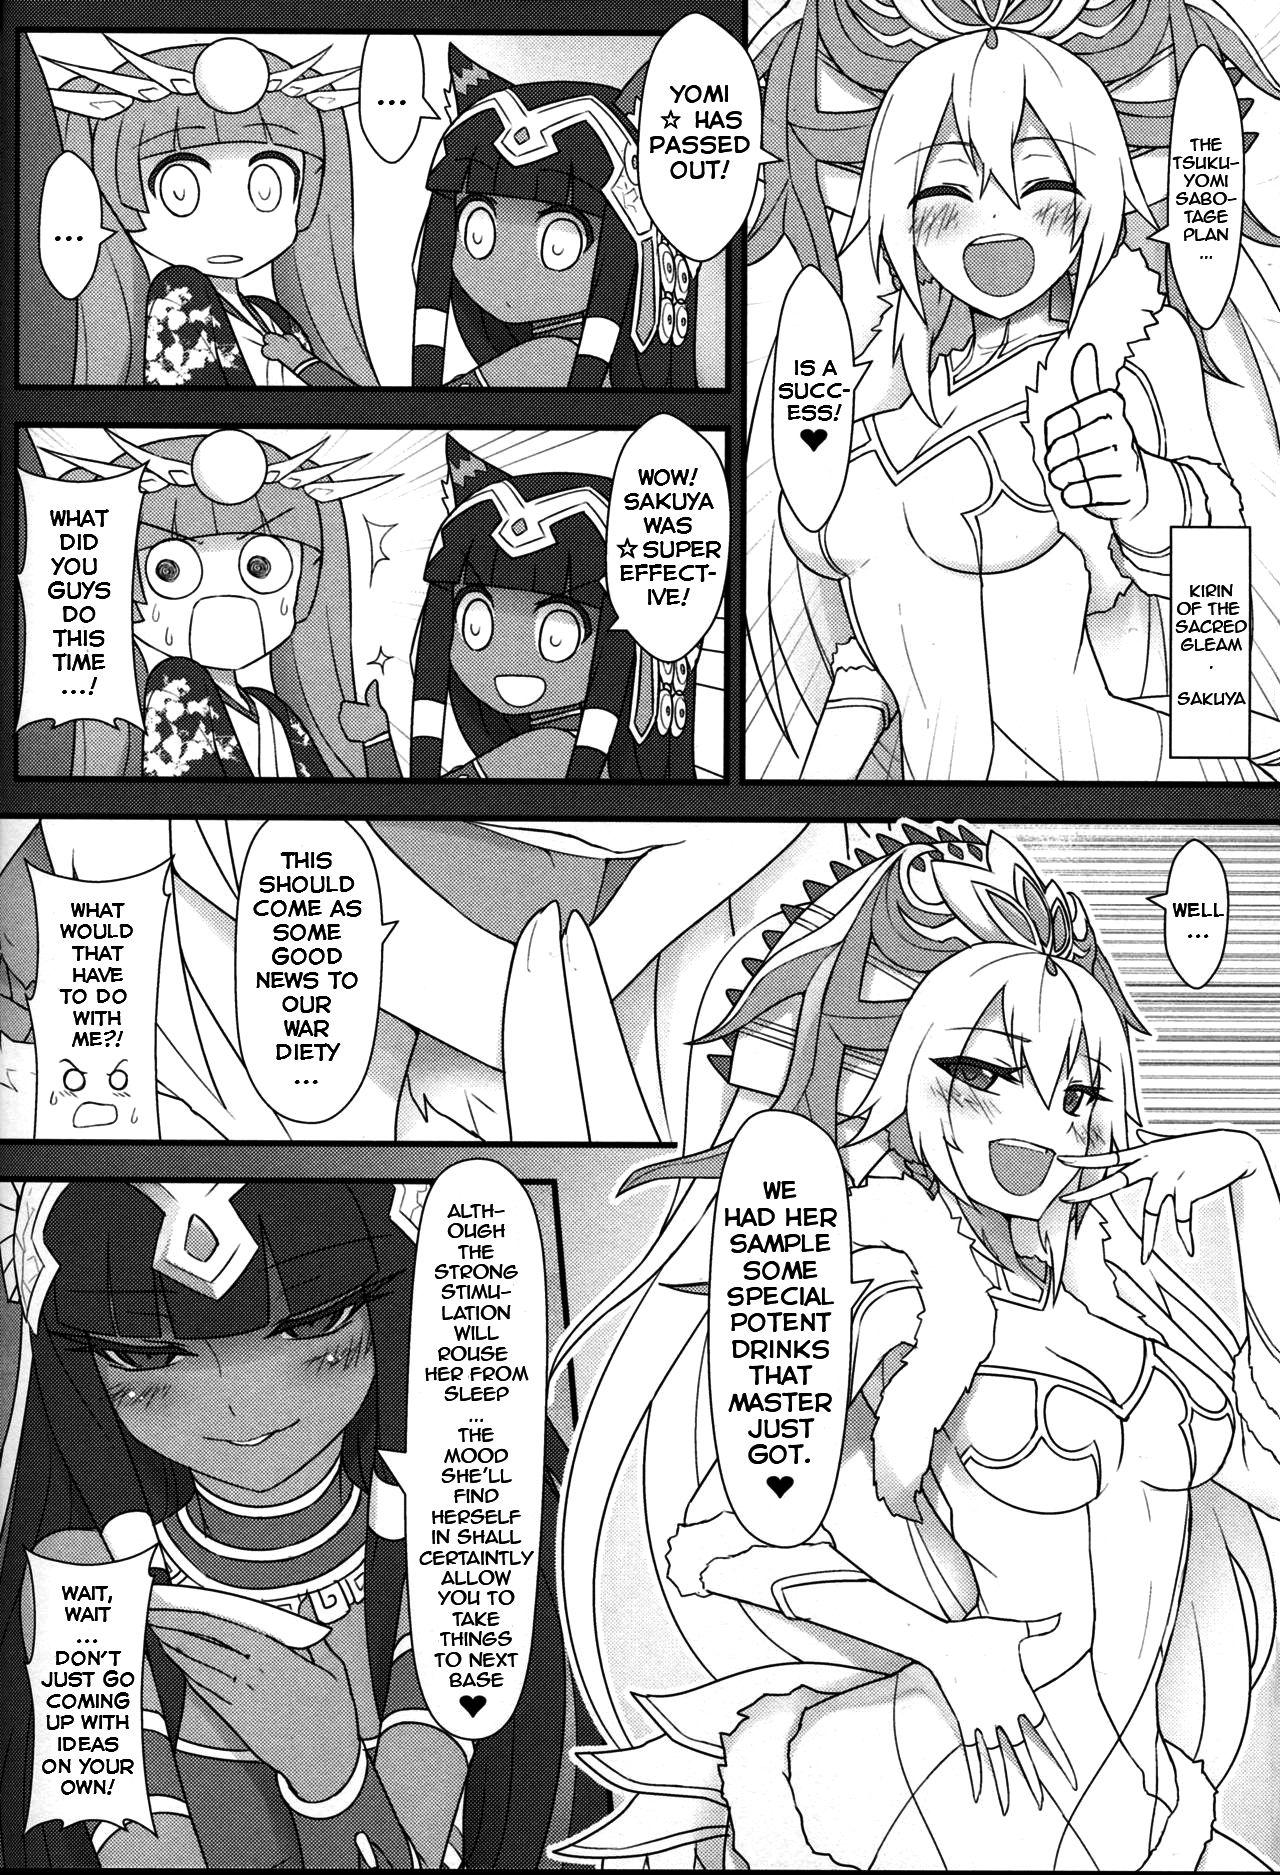 Hot PazuYomi! - Puzzle and dragons Hooker - Page 5